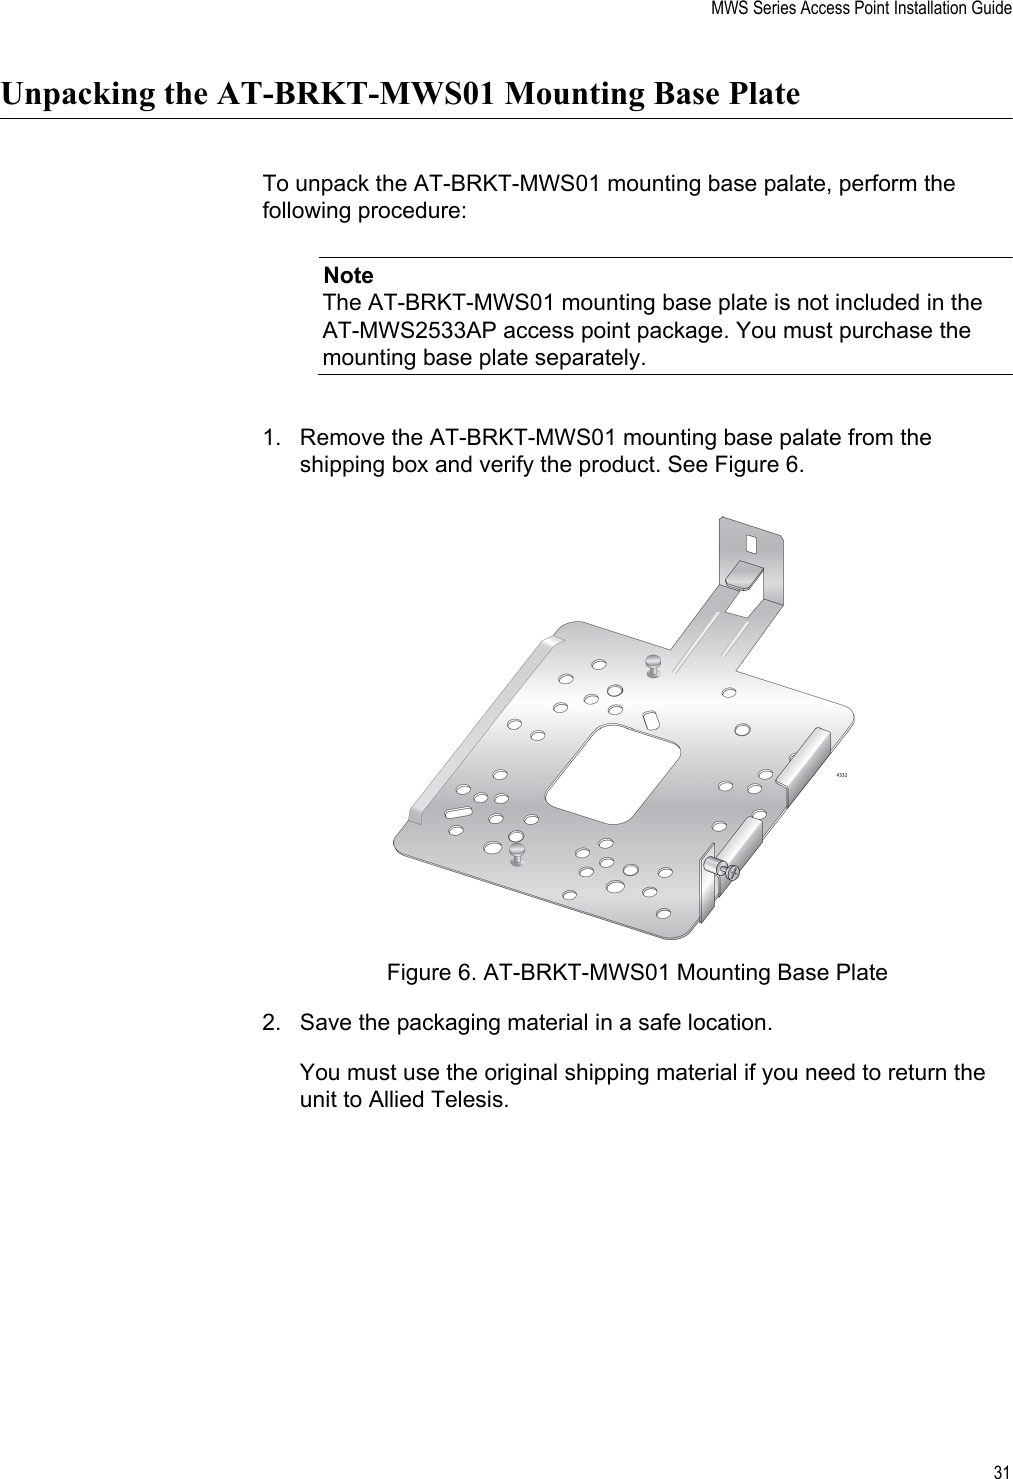 MWS Series Access Point Installation Guide31Unpacking the AT-BRKT-MWS01 Mounting Base PlateTo unpack the AT-BRKT-MWS01 mounting base palate, perform the following procedure:NoteThe AT-BRKT-MWS01 mounting base plate is not included in the AT-MWS2533AP access point package. You must purchase the mounting base plate separately.1. Remove the AT-BRKT-MWS01 mounting base palate from the shipping box and verify the product. See Figure 6.Figure 6. AT-BRKT-MWS01 Mounting Base Plate2. Save the packaging material in a safe location. You must use the original shipping material if you need to return the unit to Allied Telesis.